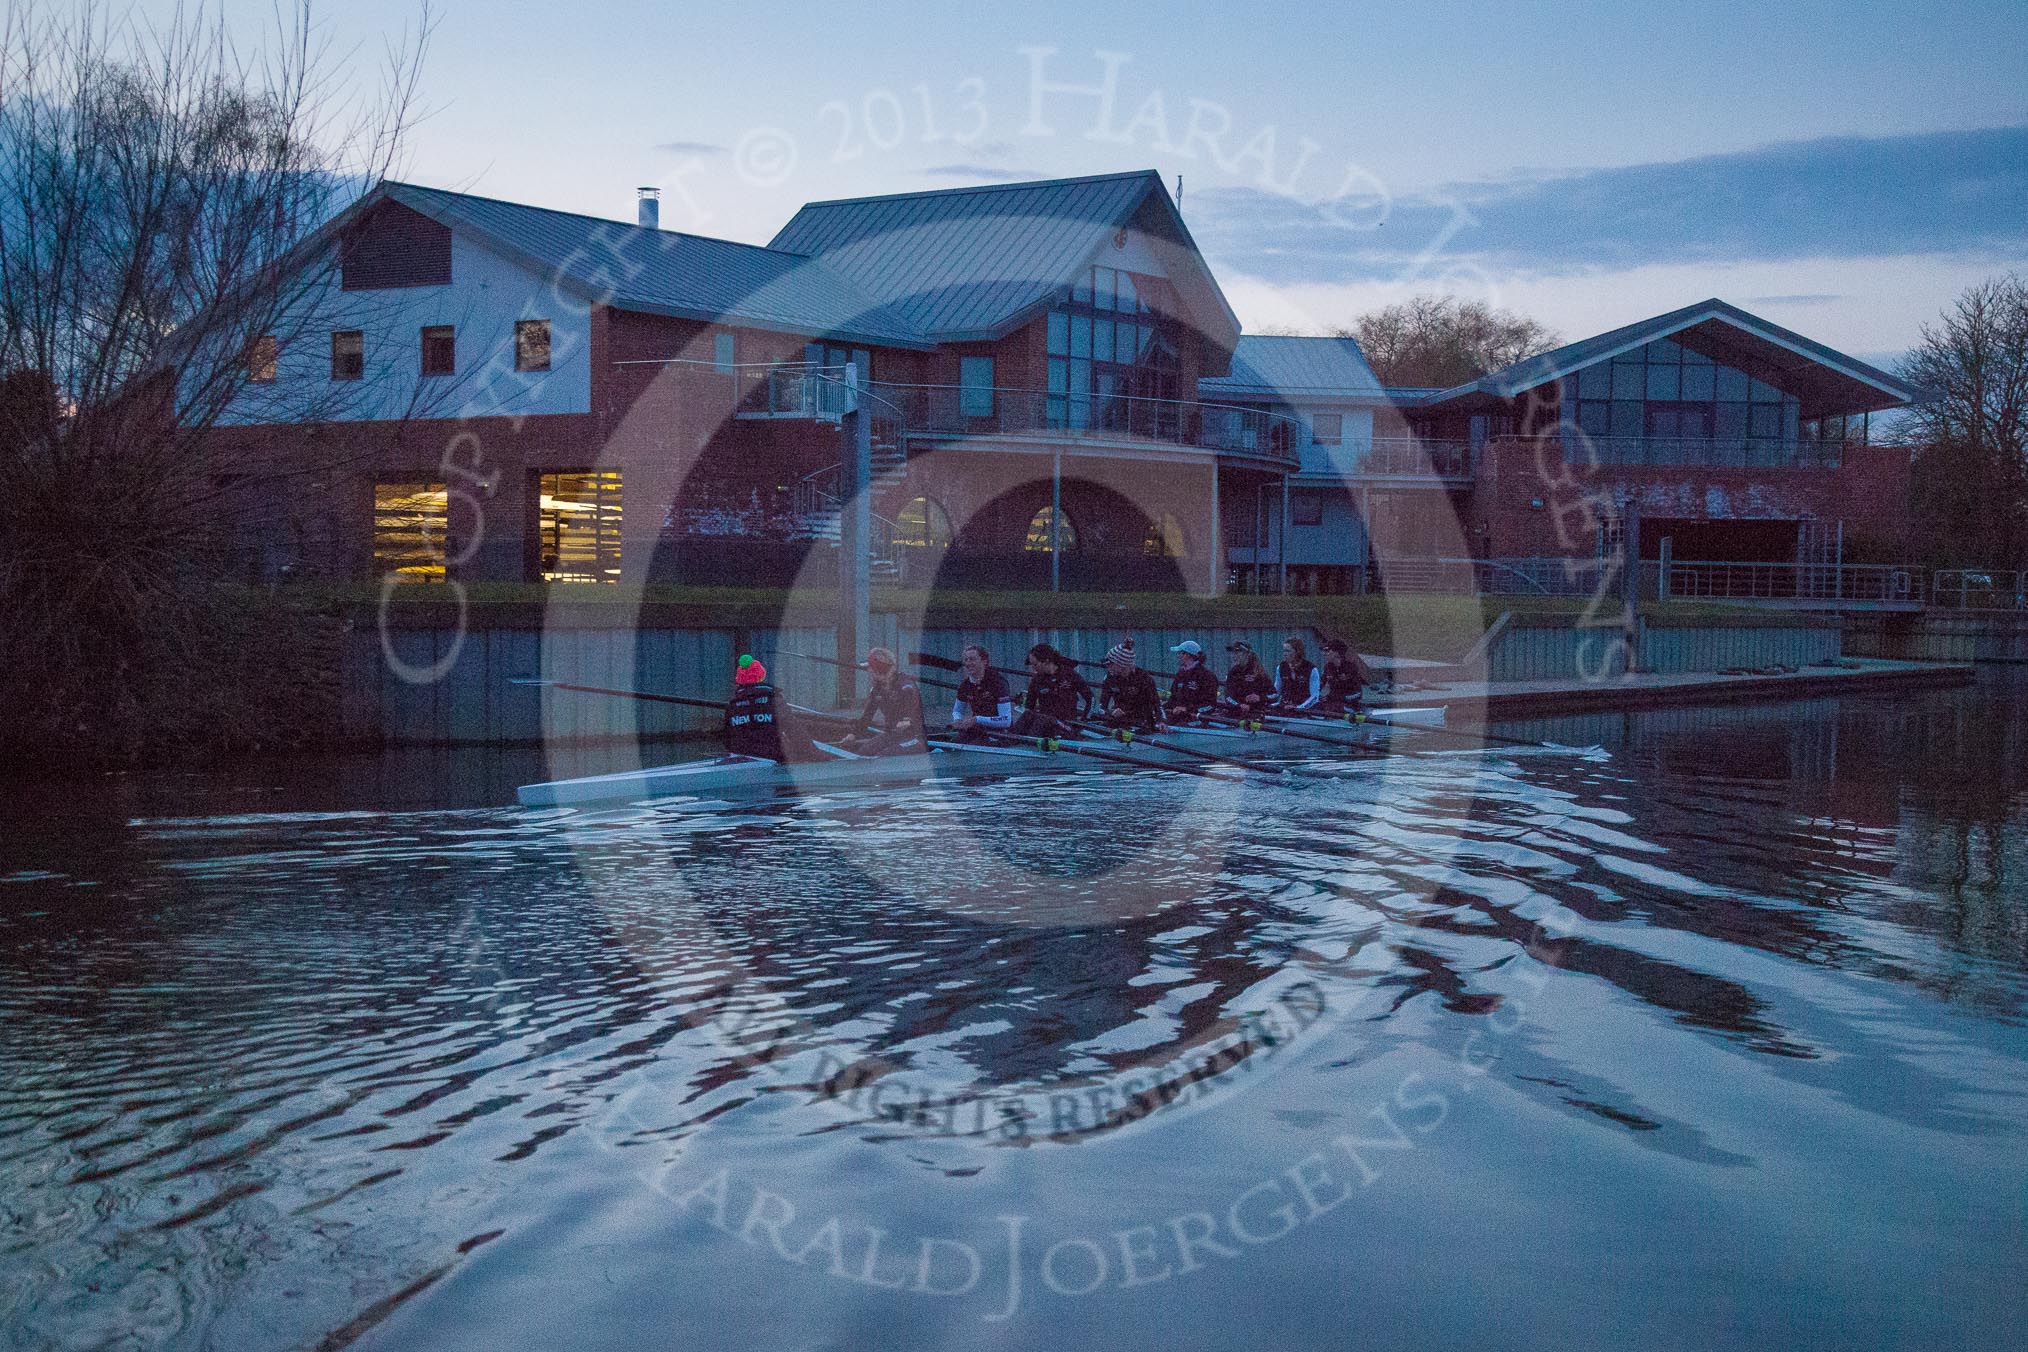 The Boat Race season 2013 - OUWBC training: The OUWBC Blue Boat returning to Fleming Boathouse, in last light, afther the training session..
River Thames,
Wallingford,
Oxfordshire,
United Kingdom,
on 13 March 2013 at 18:20, image #233